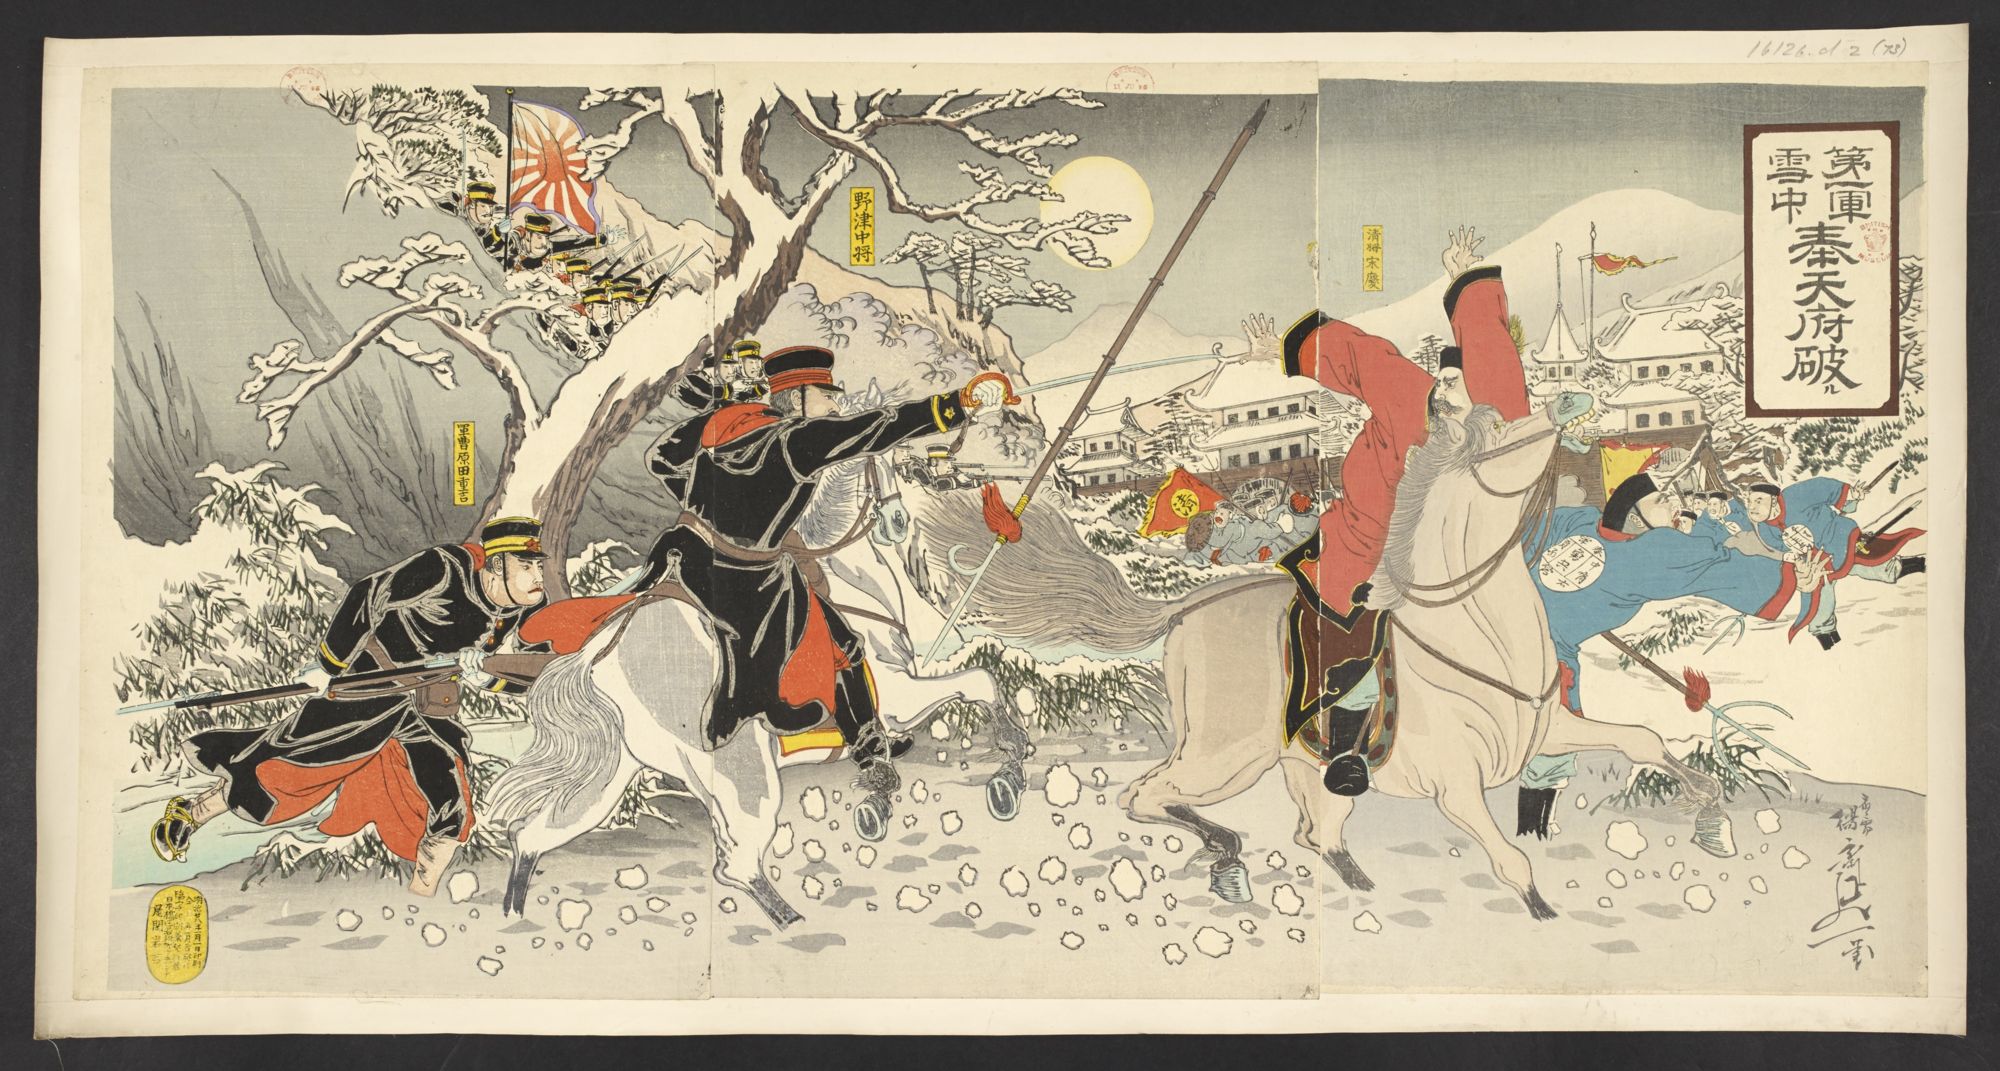 Gallery | The Sino-Japanese War of 1894-1895 ： as seen in prints